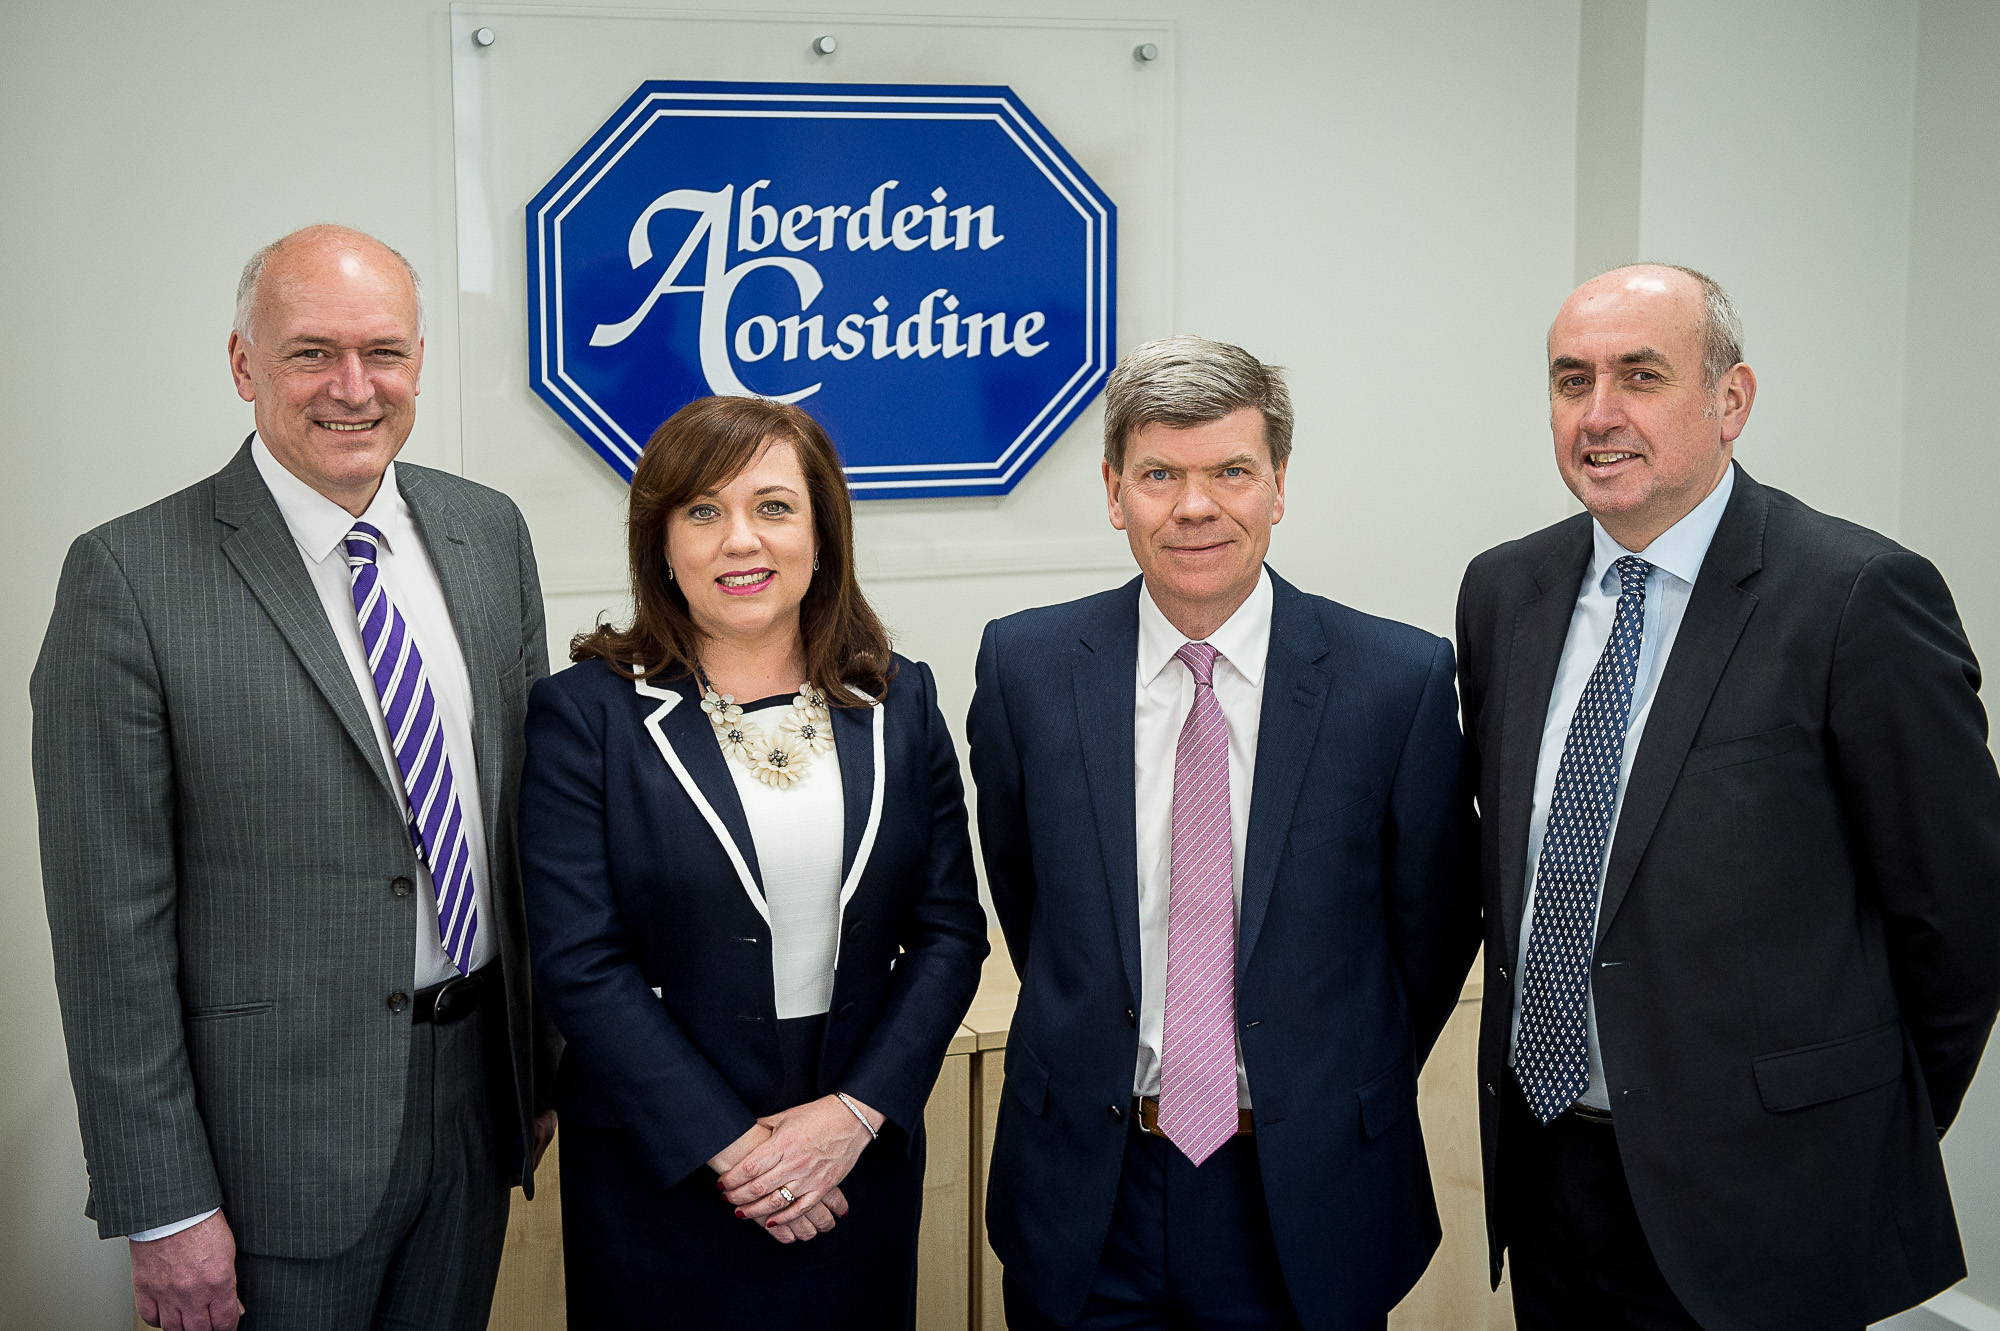 Aberdein Considine expands with merger in Glasgow